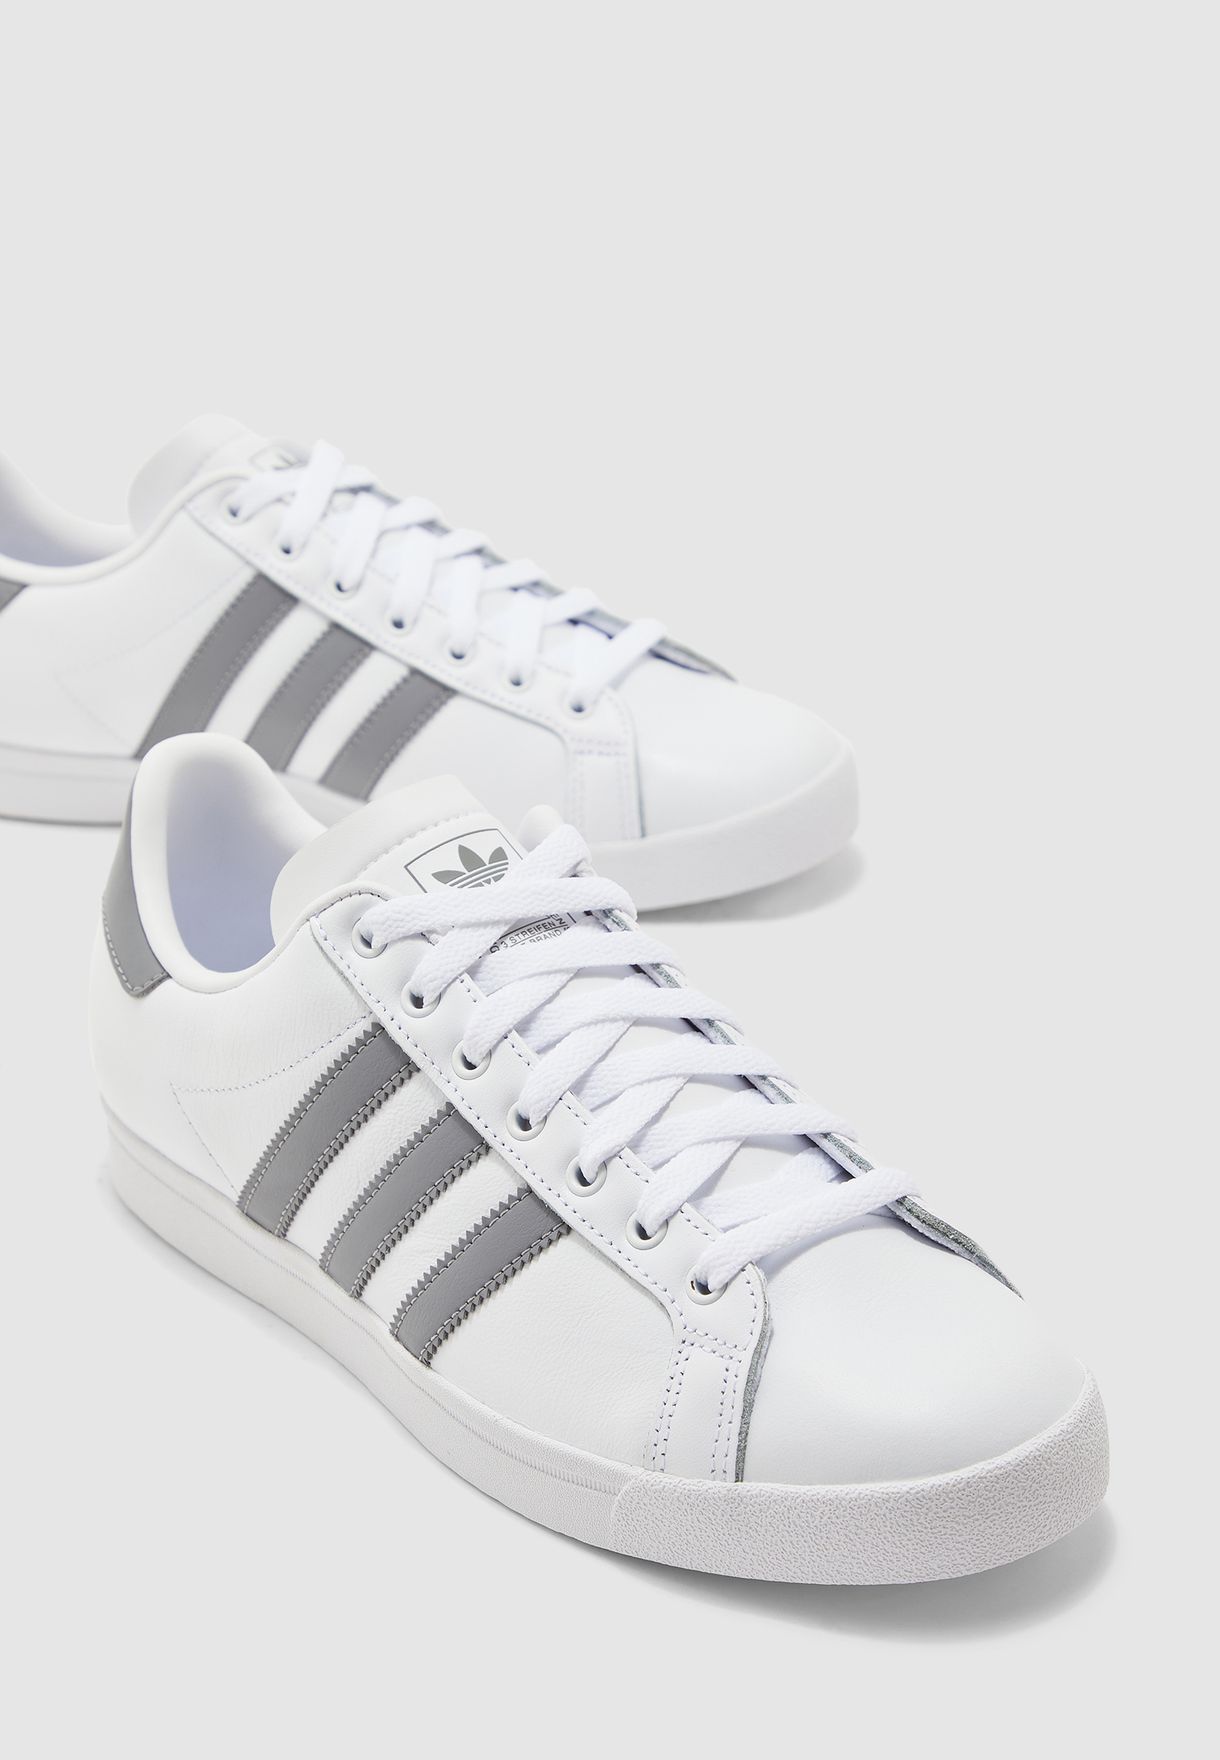 adidas shoes limited edition 219